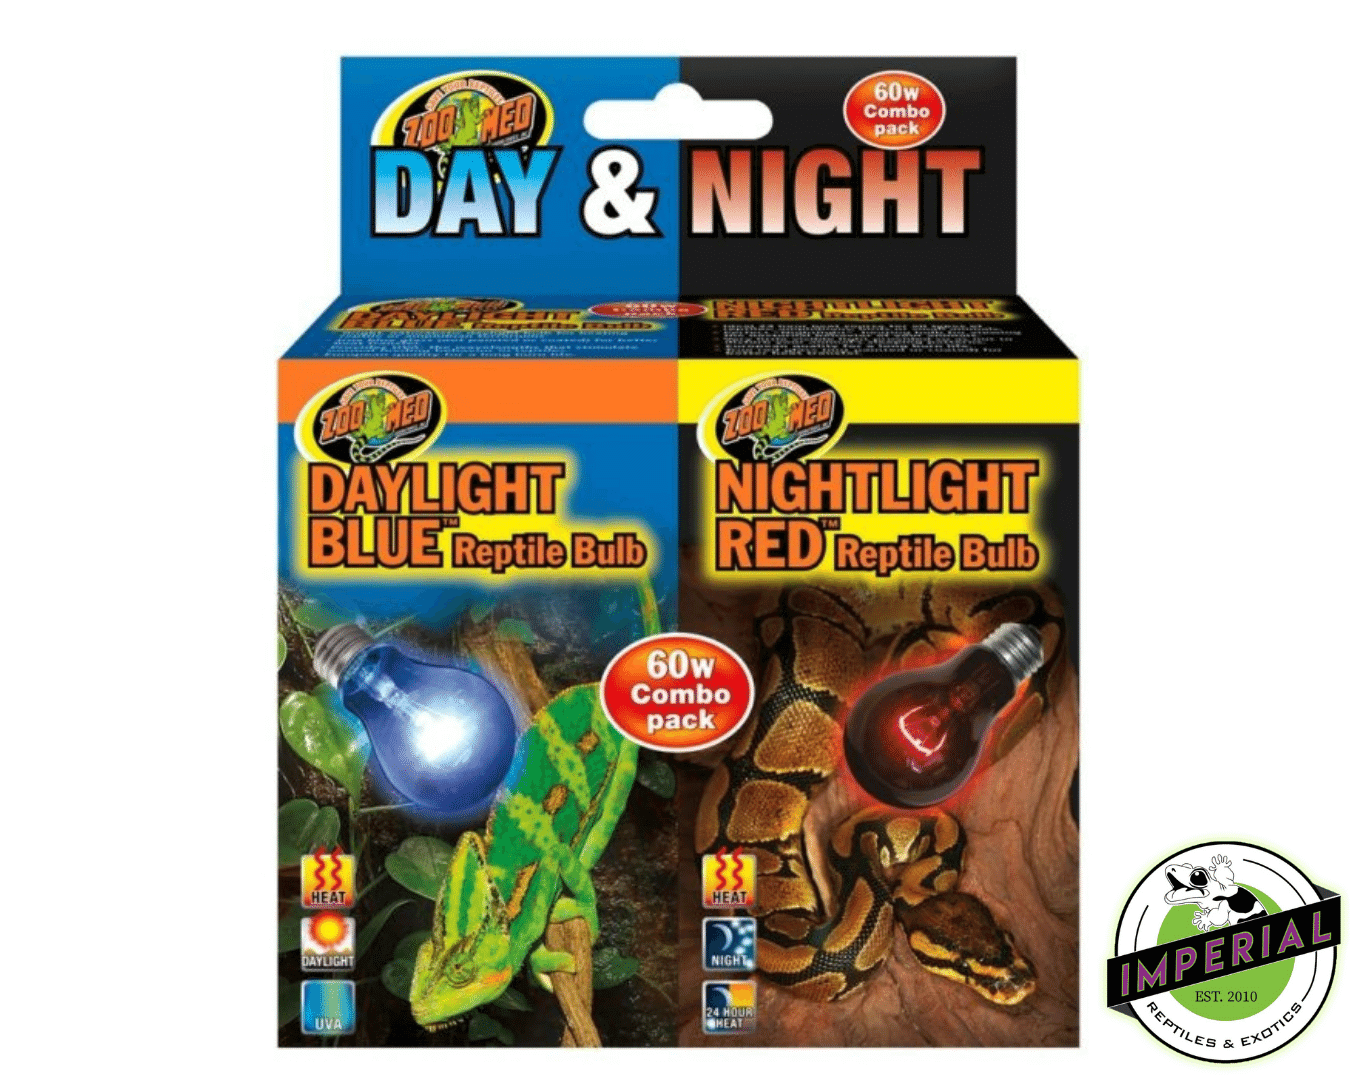 day and night reptile bulb for sale online, buy cheap reptile supplies near me